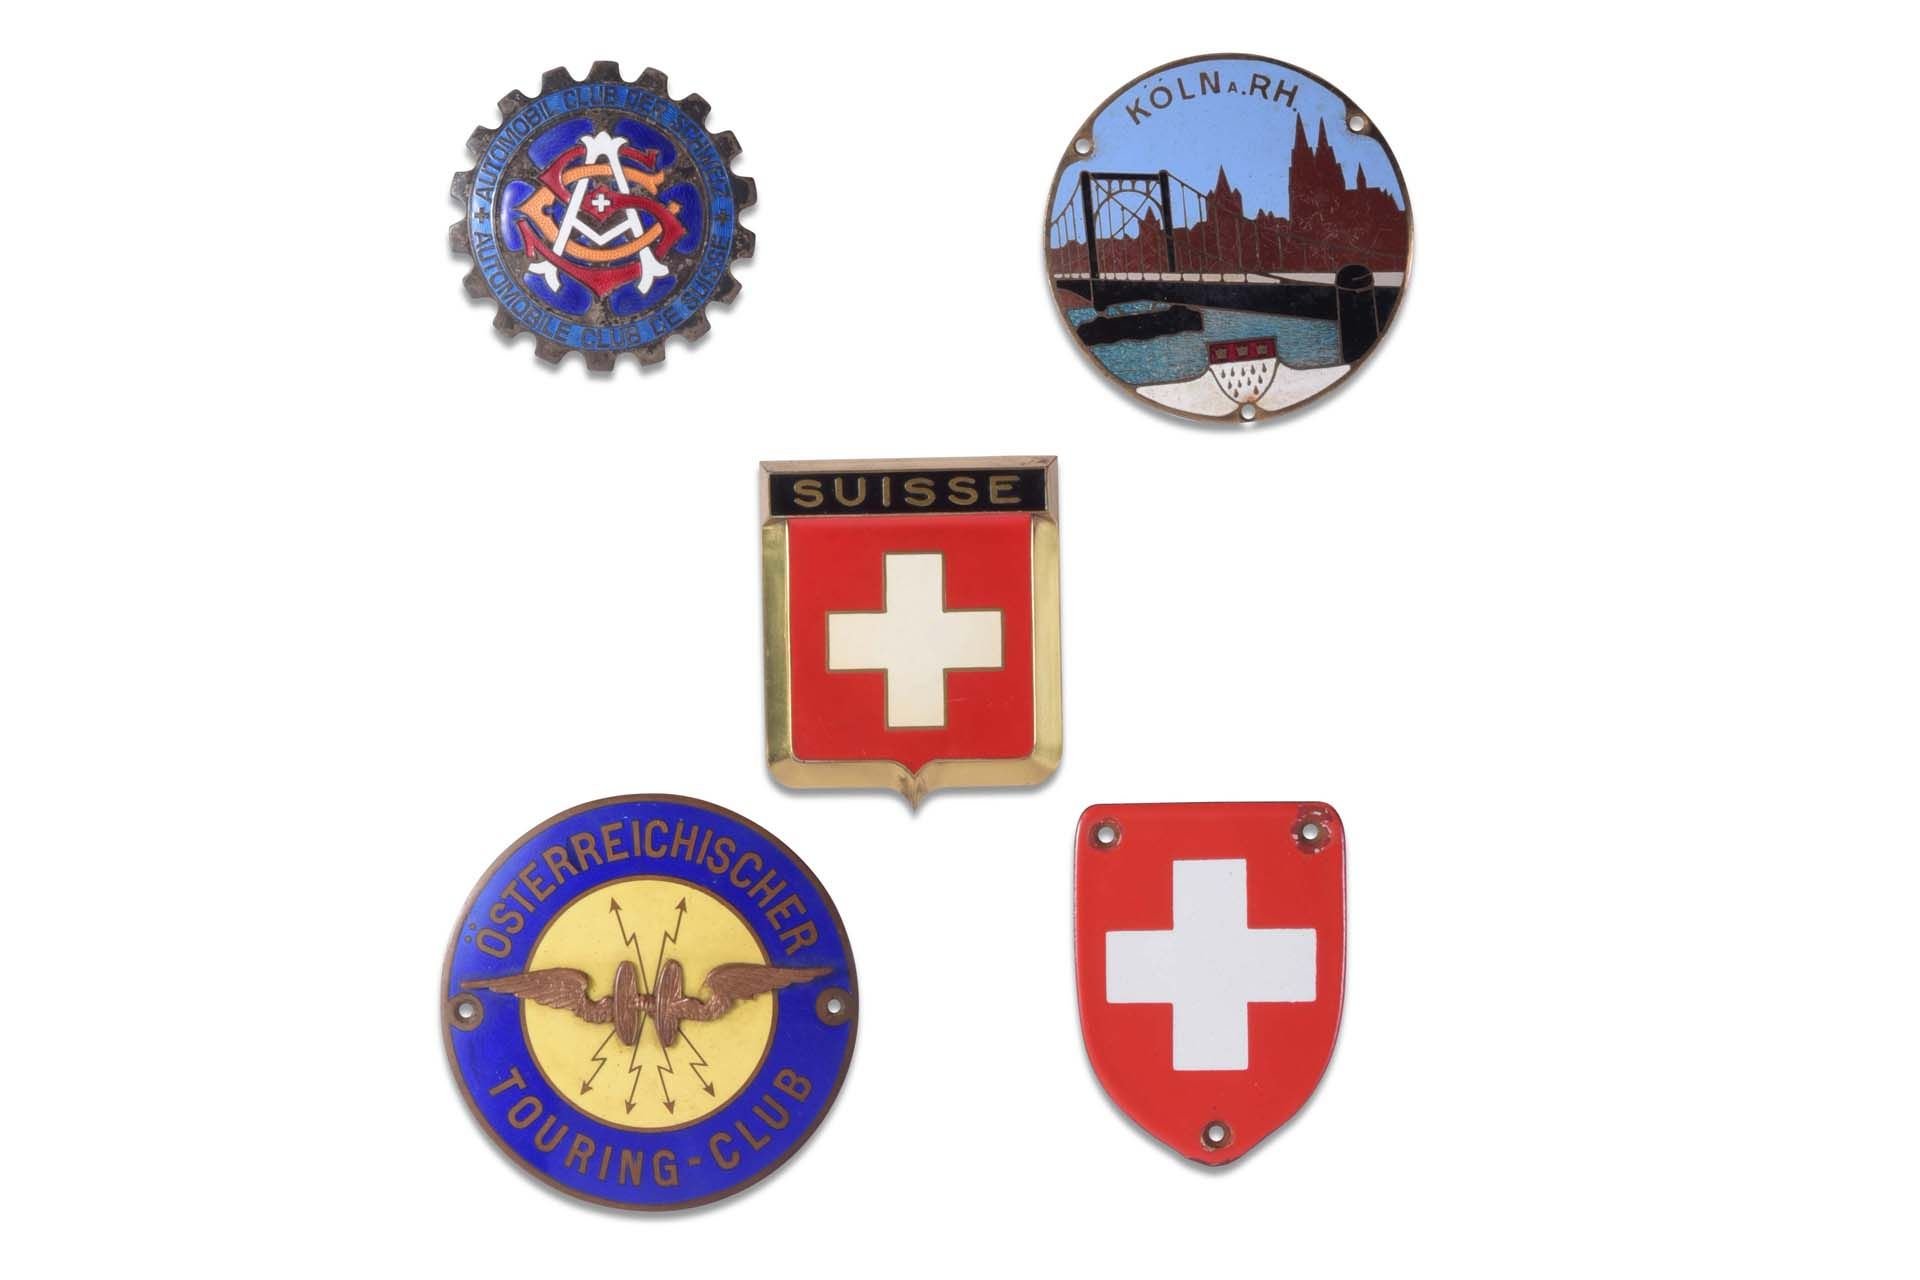 For Sale Group of Swiss, Austrian, and German Club Touring Badges